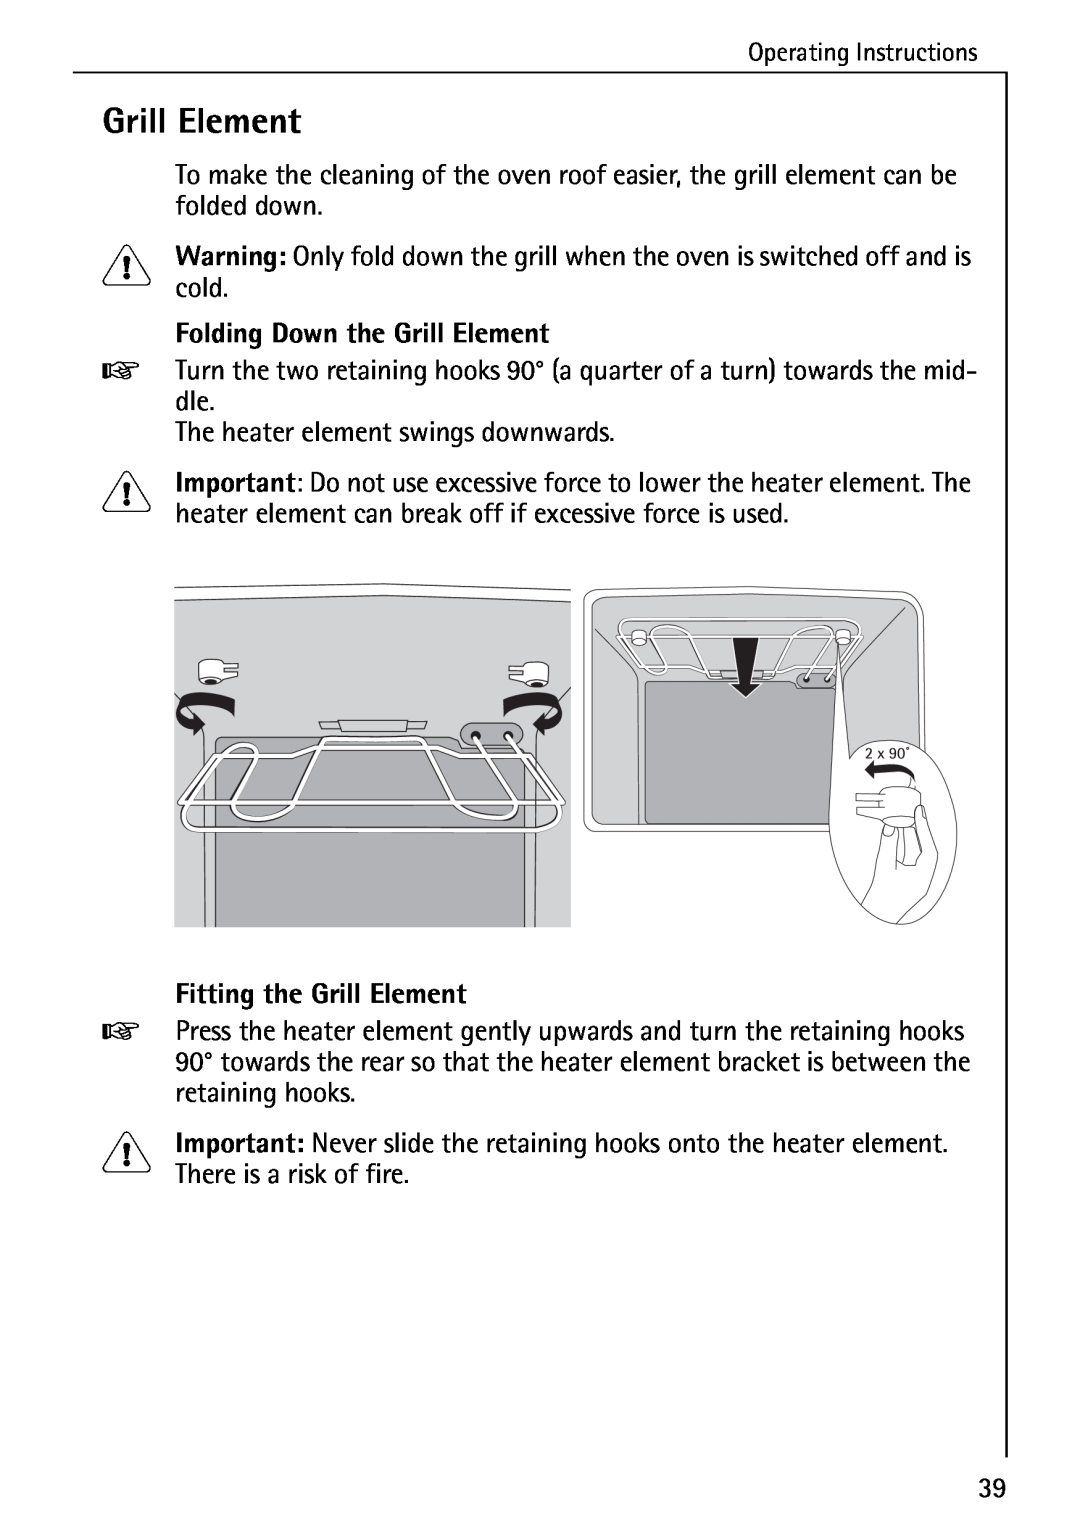 AEG 5033 V operating instructions cold, Folding Down the Grill Element, Fitting the Grill Element 